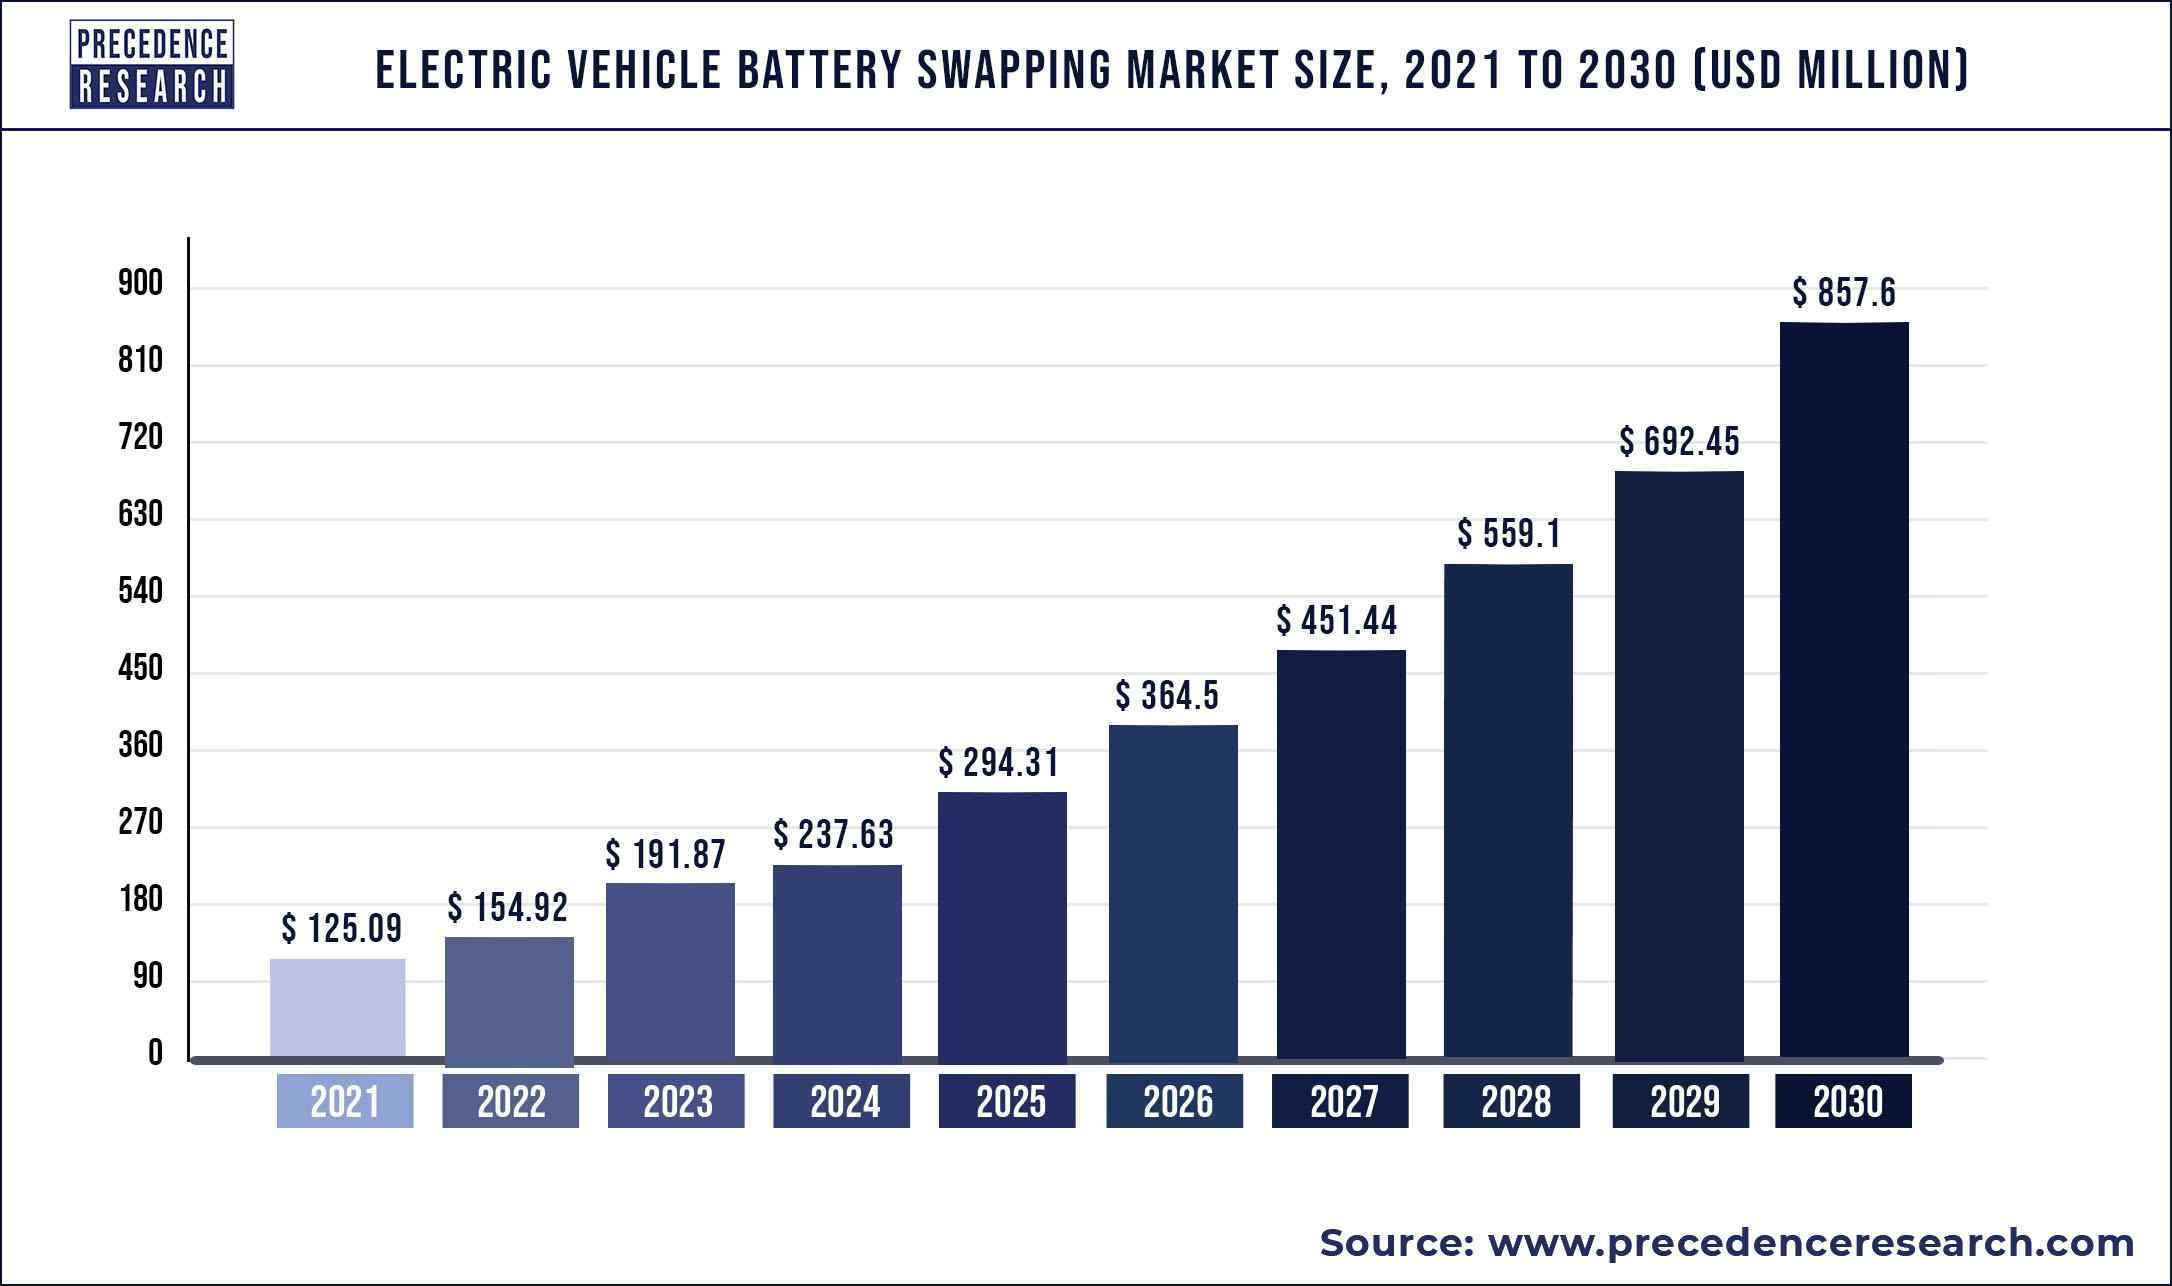 Electric Vehicle Battery Swapping Market Size to Exceed US$ 857.6 million by 2030 | Says Precedence Research